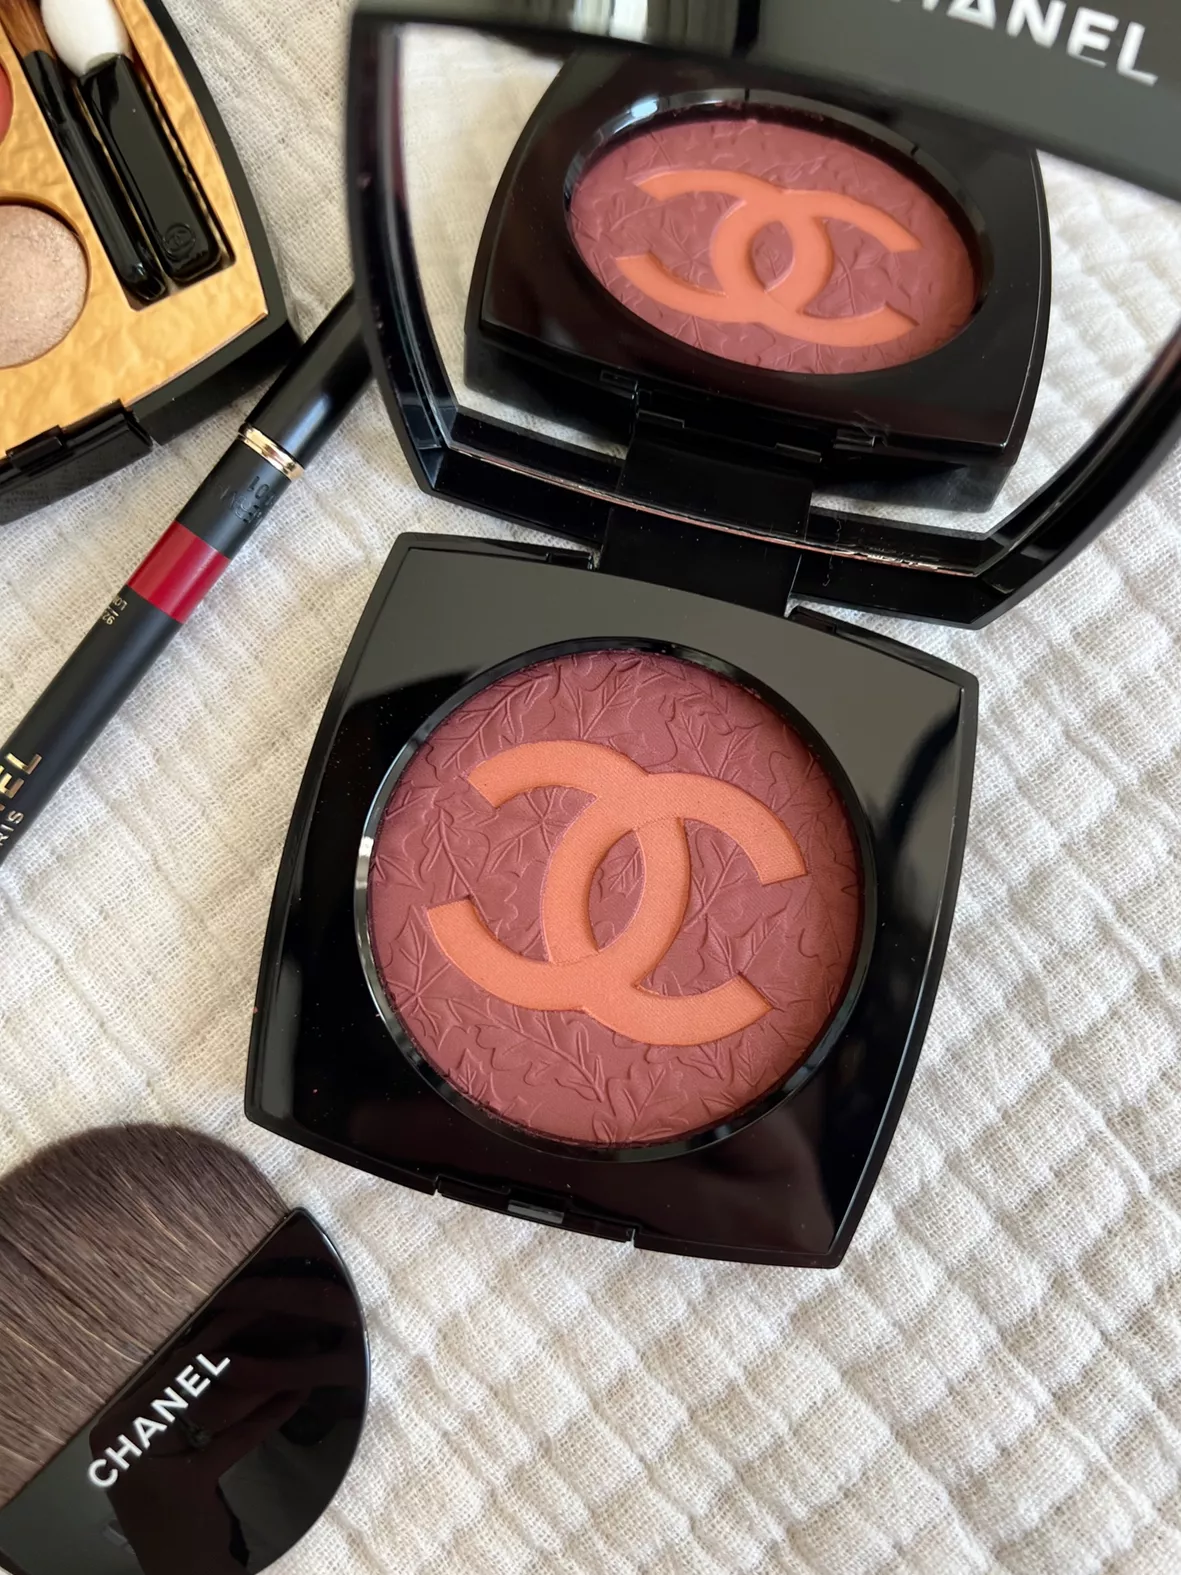 ABSOLUTE ALLURE Makeup Set - CHANEL